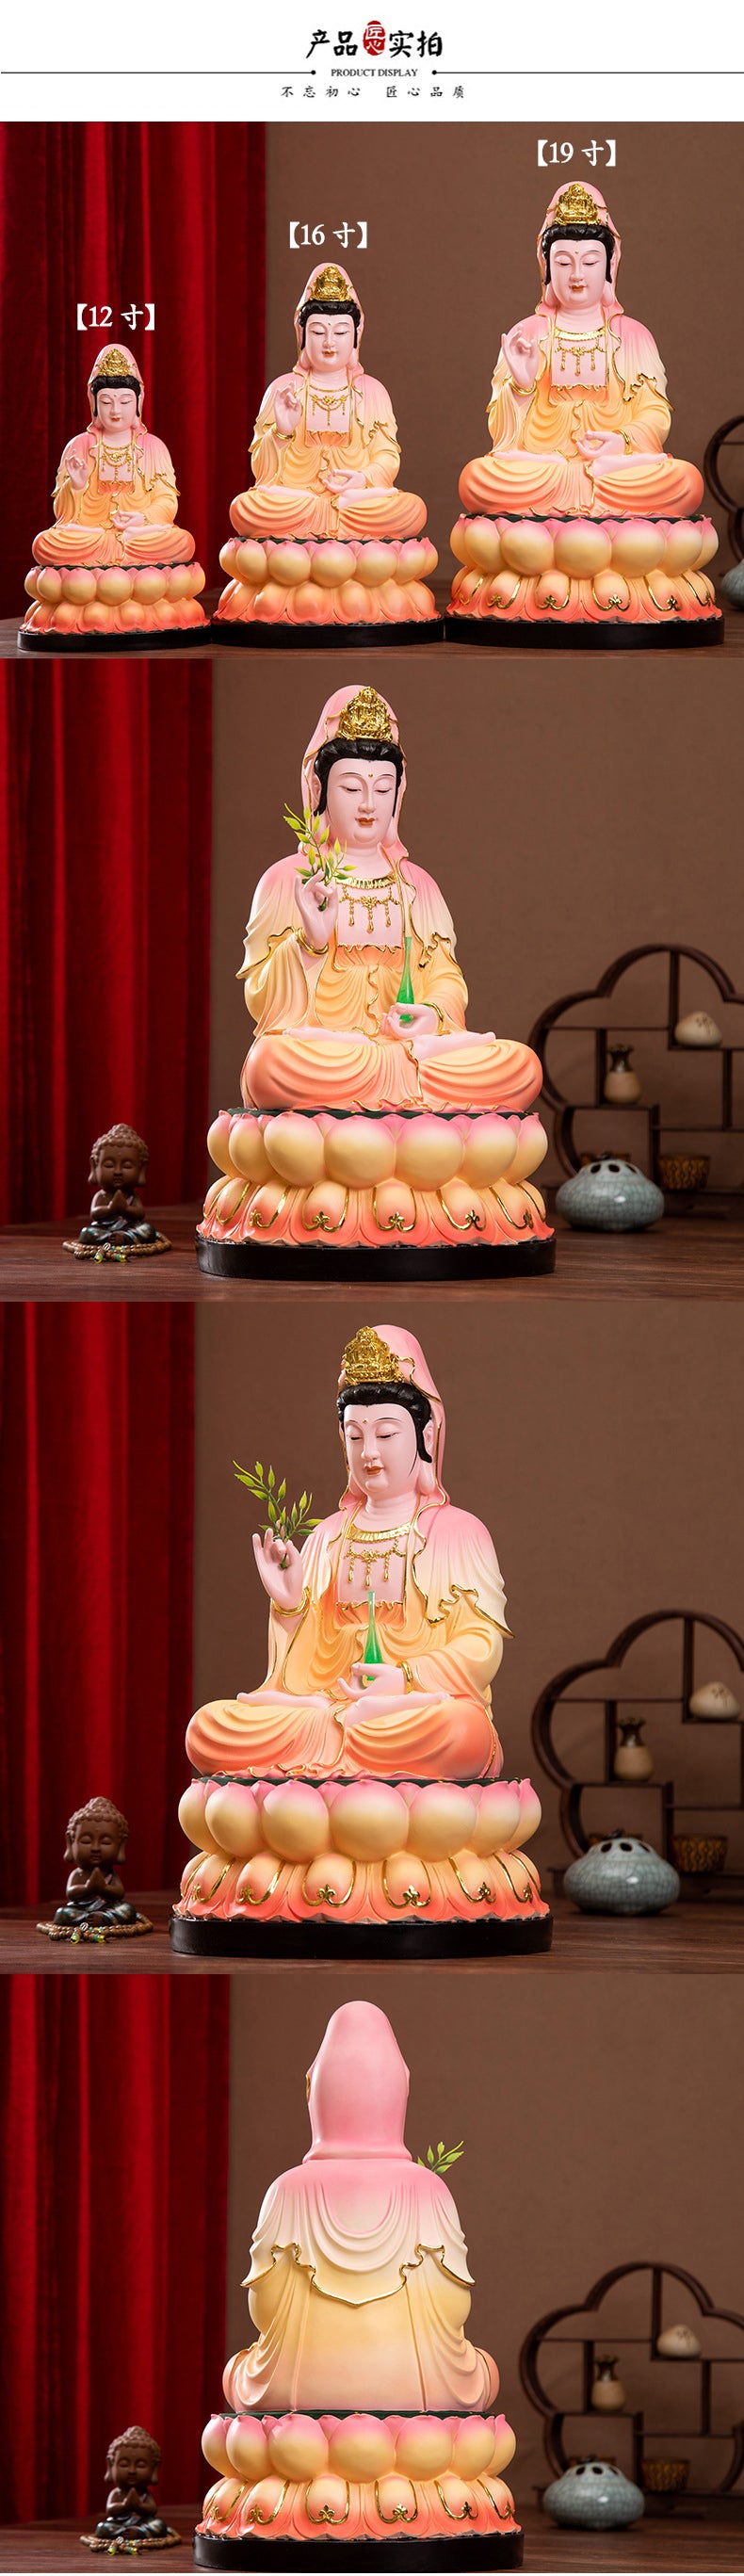 Guan Yin Bodhisattva Buddha Statue for Sale, Hand Holding Jade Bottle and Willow Leaves Kuan Yin Goddess, Pink Resin Material, Offerings Details 2